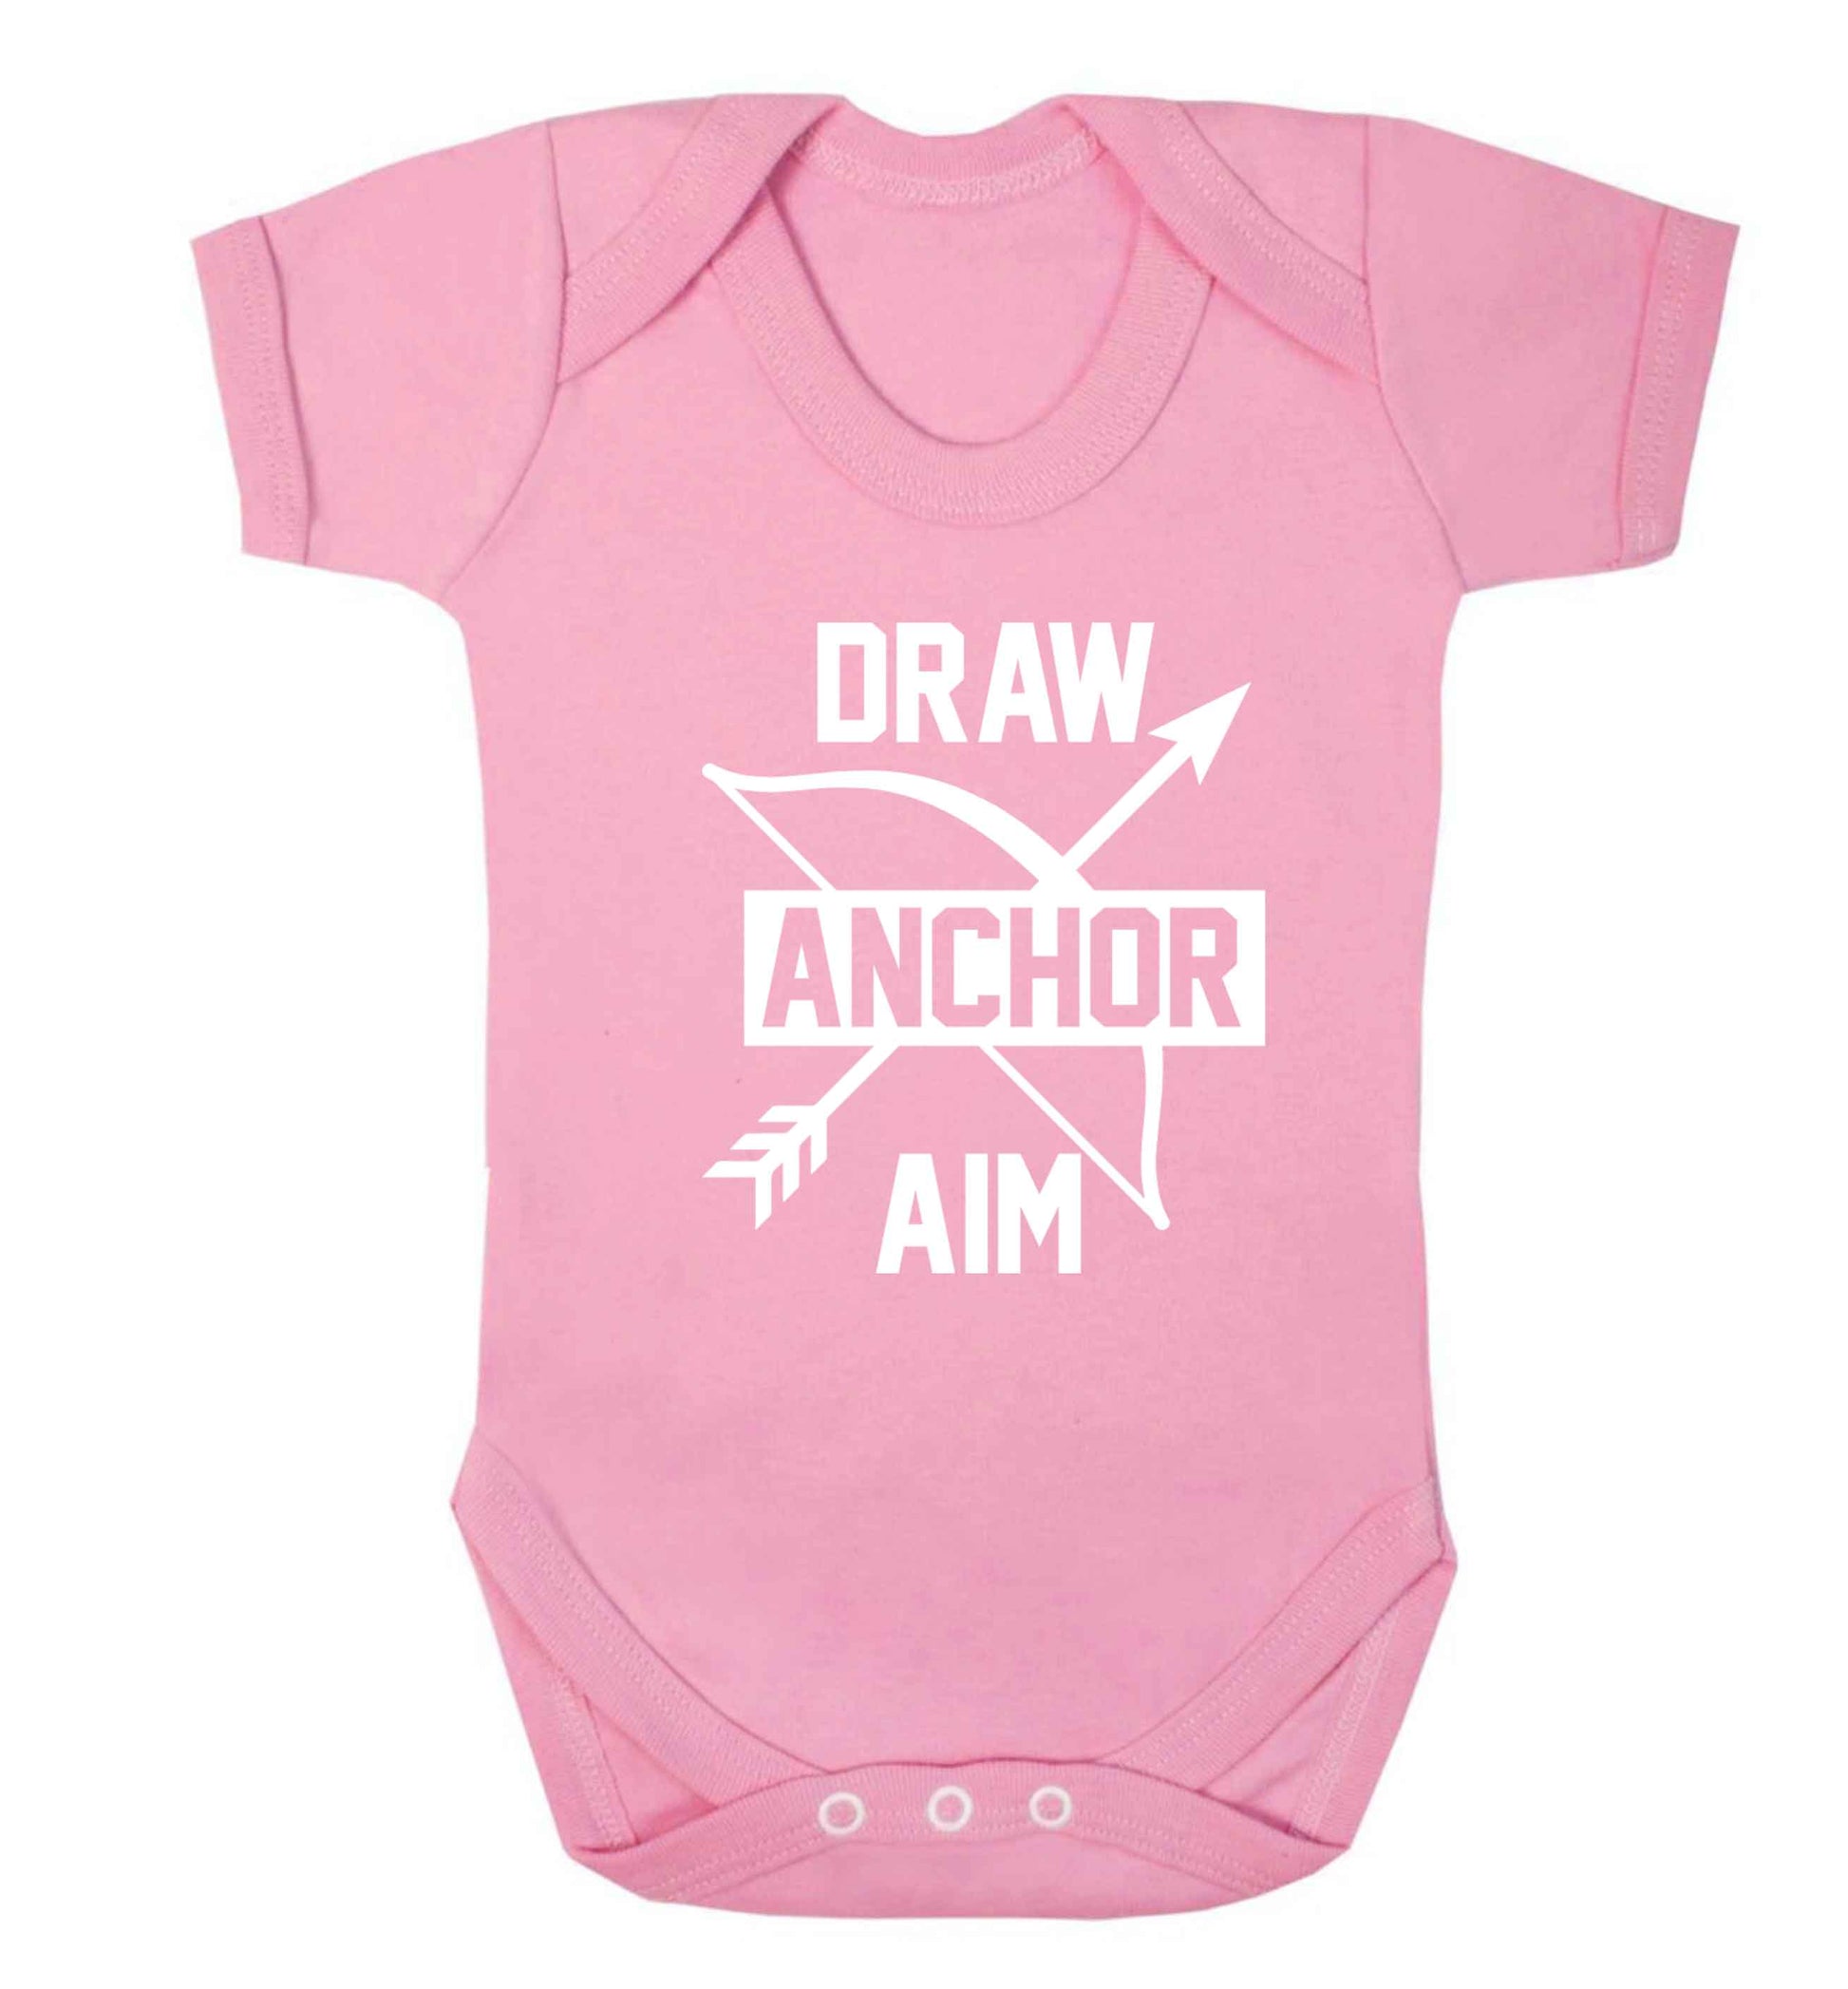 Draw anchor aim Baby Vest pale pink 18-24 months